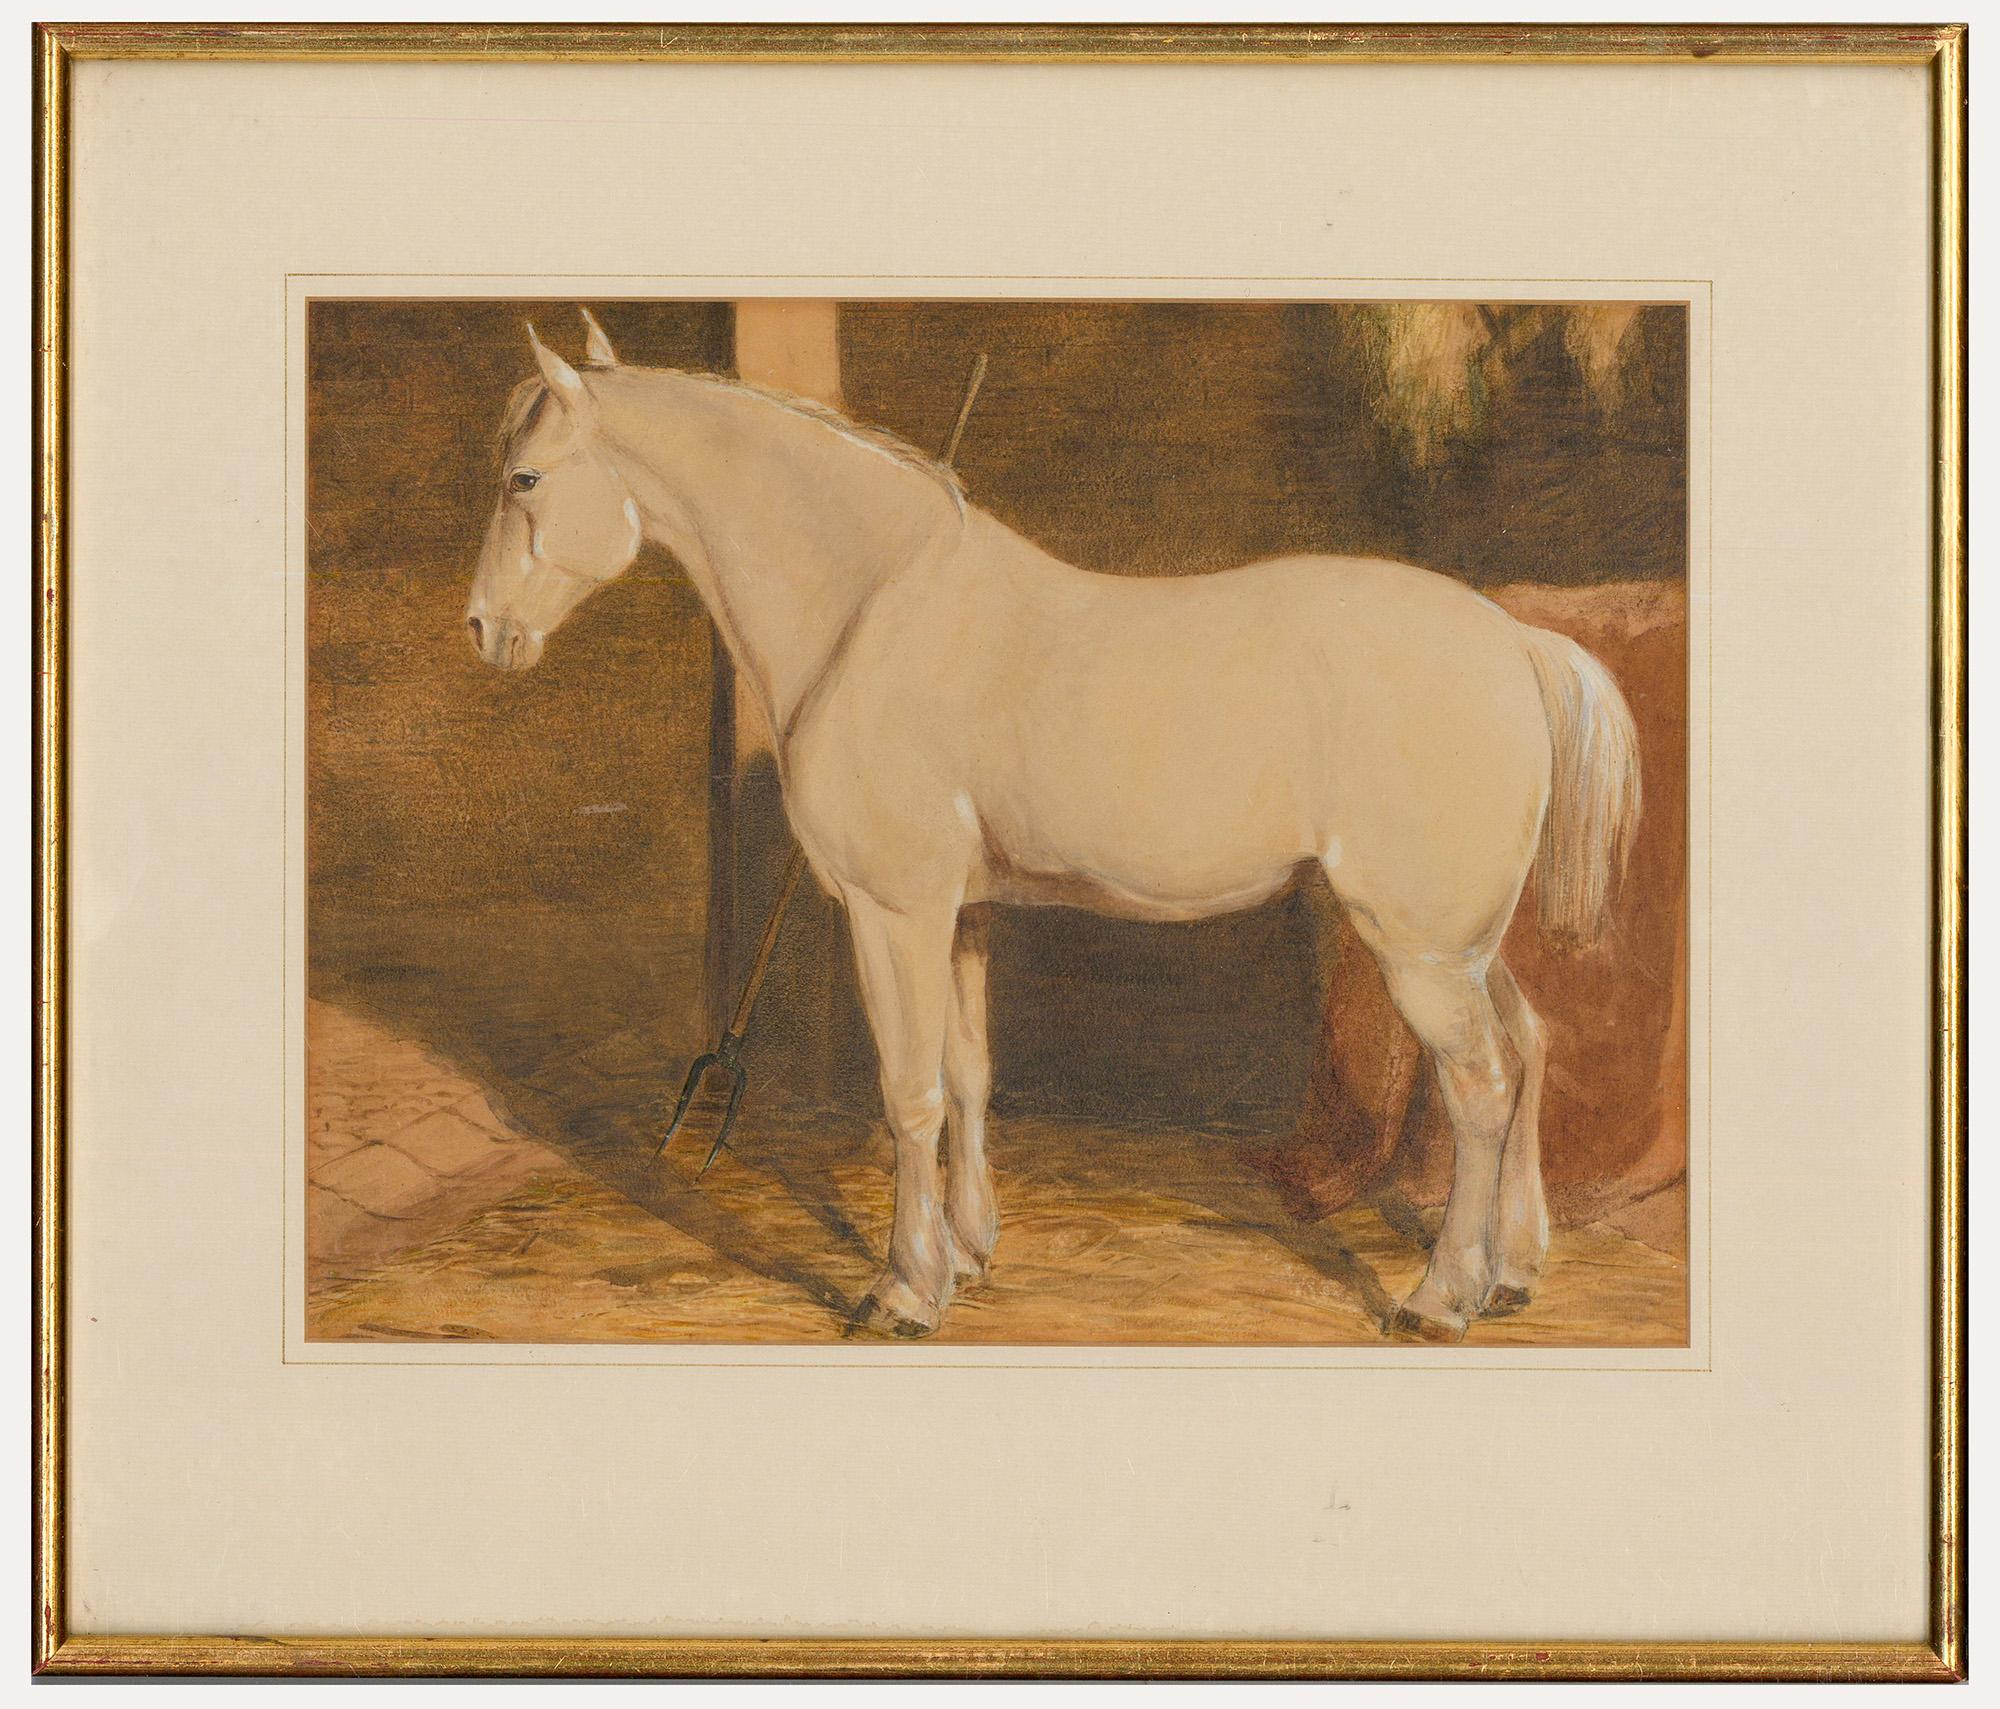 Unknown Animal Art - Late 19th Century Watercolour - White Horse in a Stable